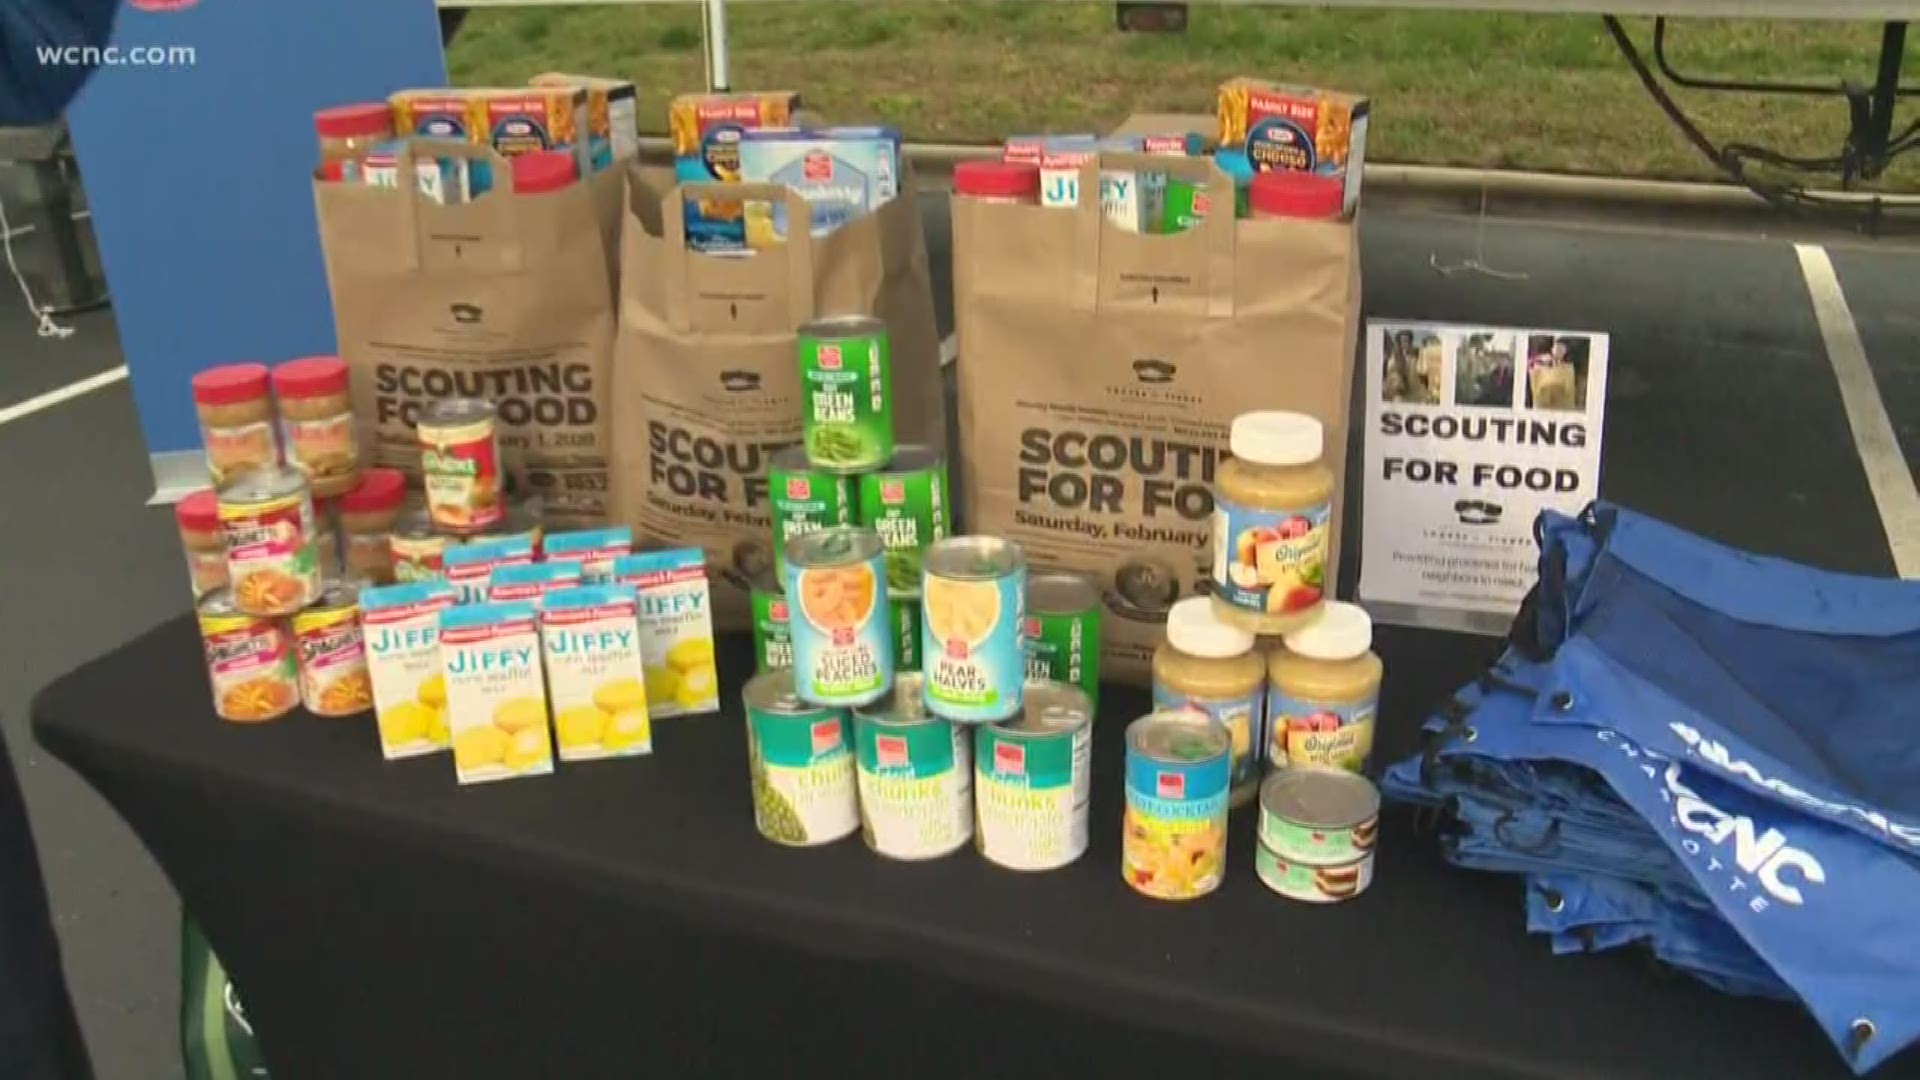 Loaves and Fishes is teaming with WCNC and the Boy Scouts to collect food that will help needy families in Mecklenburg County.